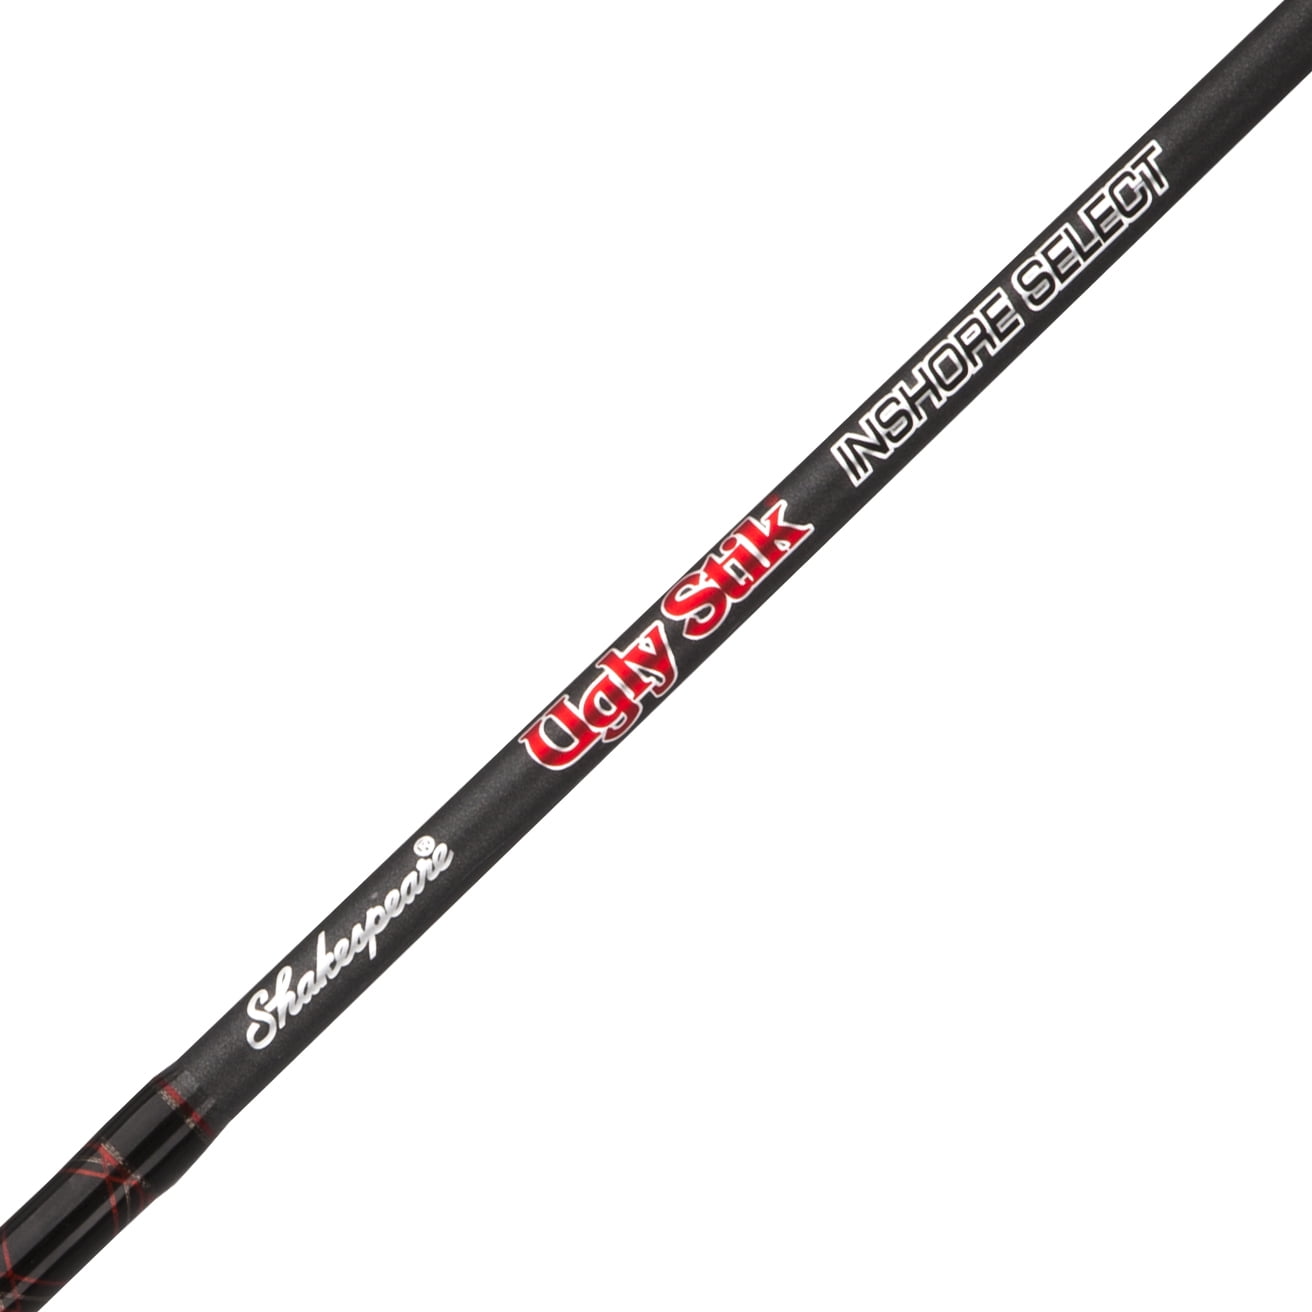 Ugly Stik 7'6” Inshore Select Spinning Rod, One Piece Inshore Rod 